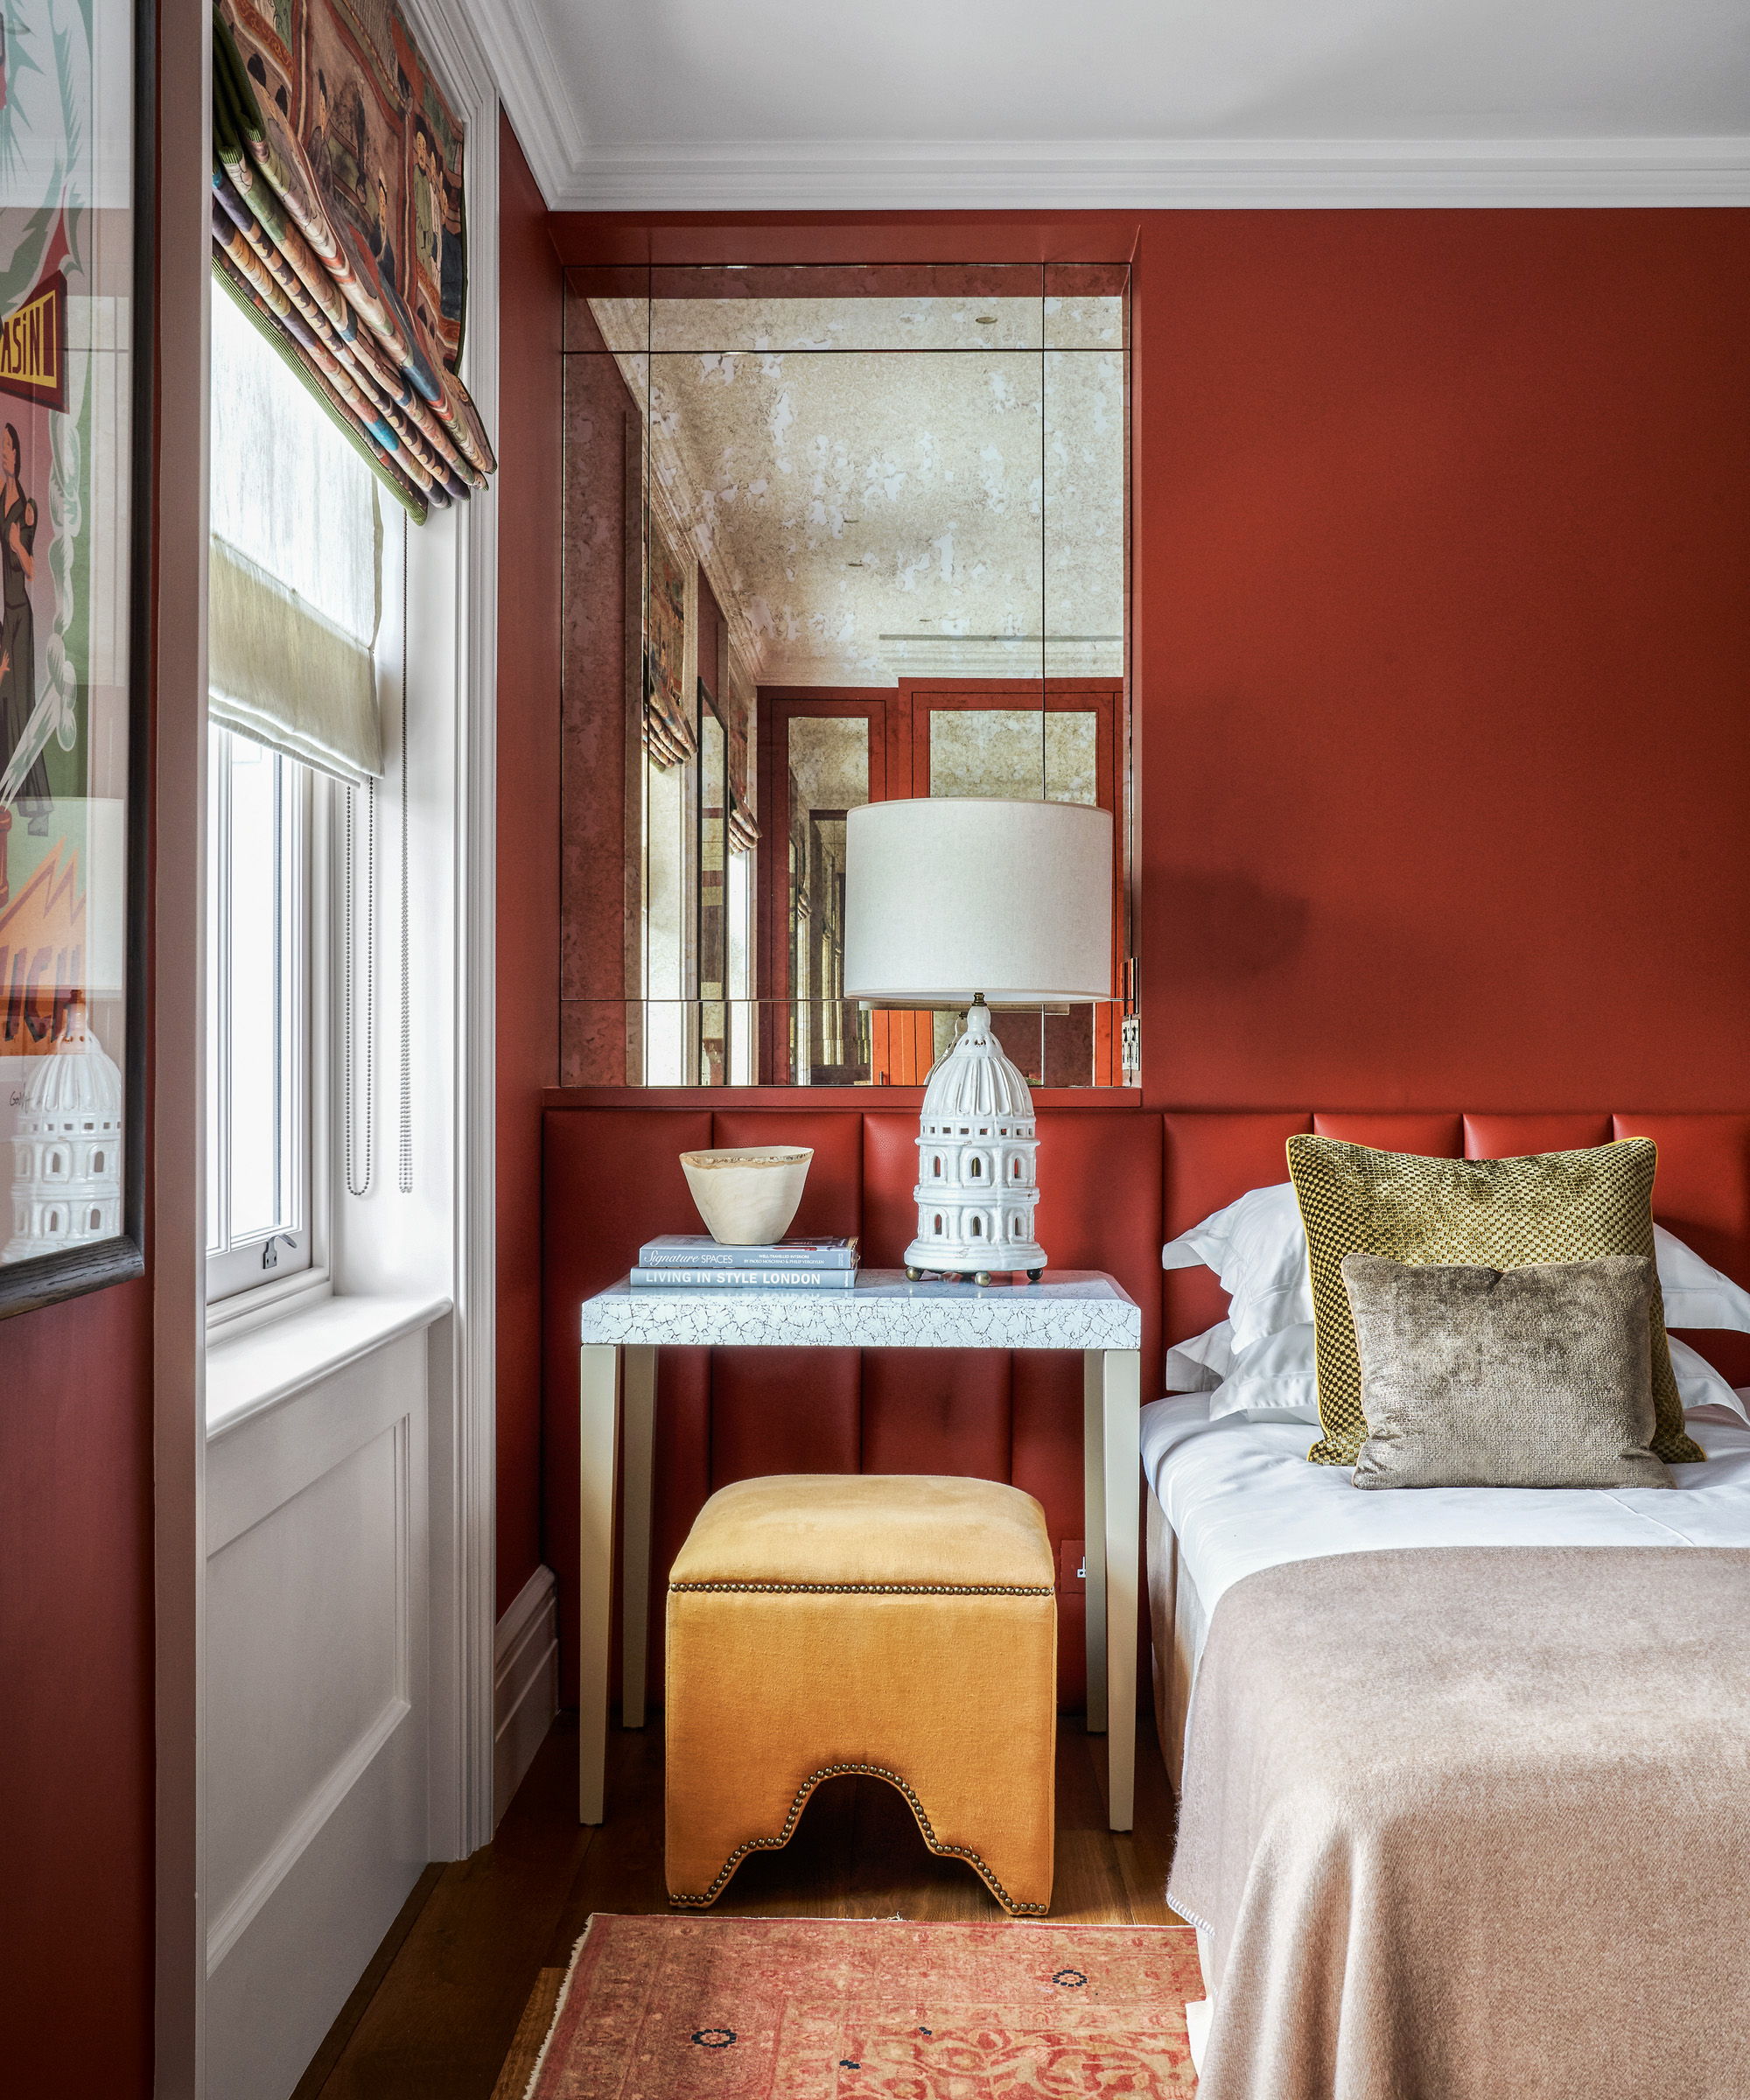 A bedroom color idea with red walls, white ceilings and a yellow velvet stool